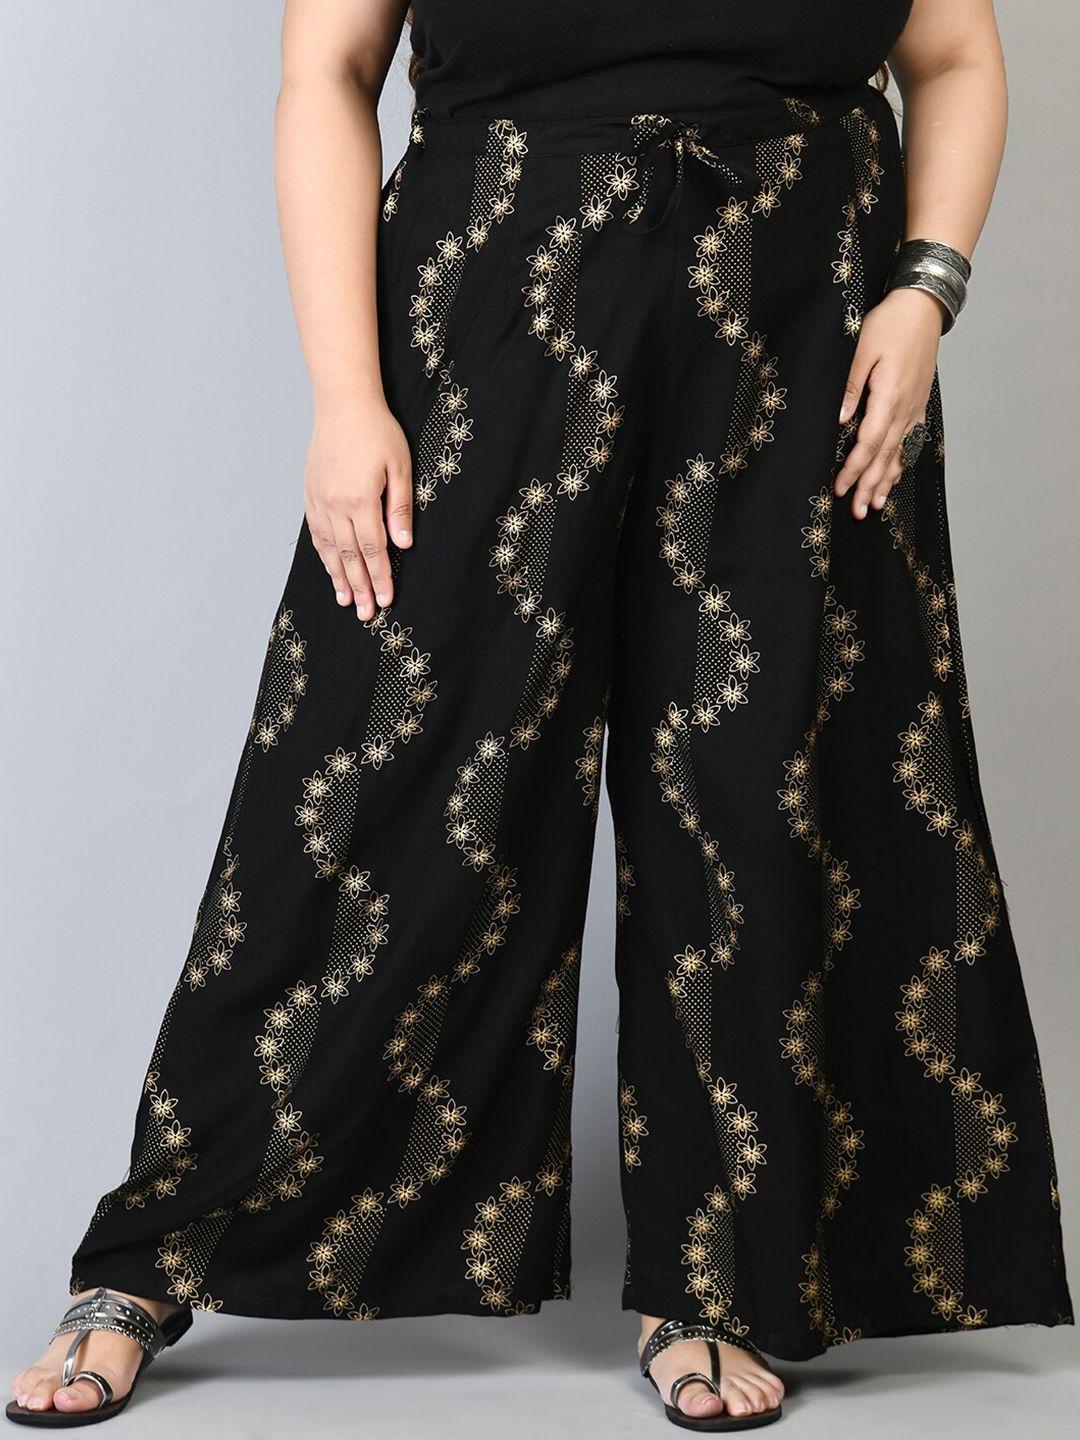 prettyplus by desinoor.com women plus size black & gold-toned floral printed palazzos